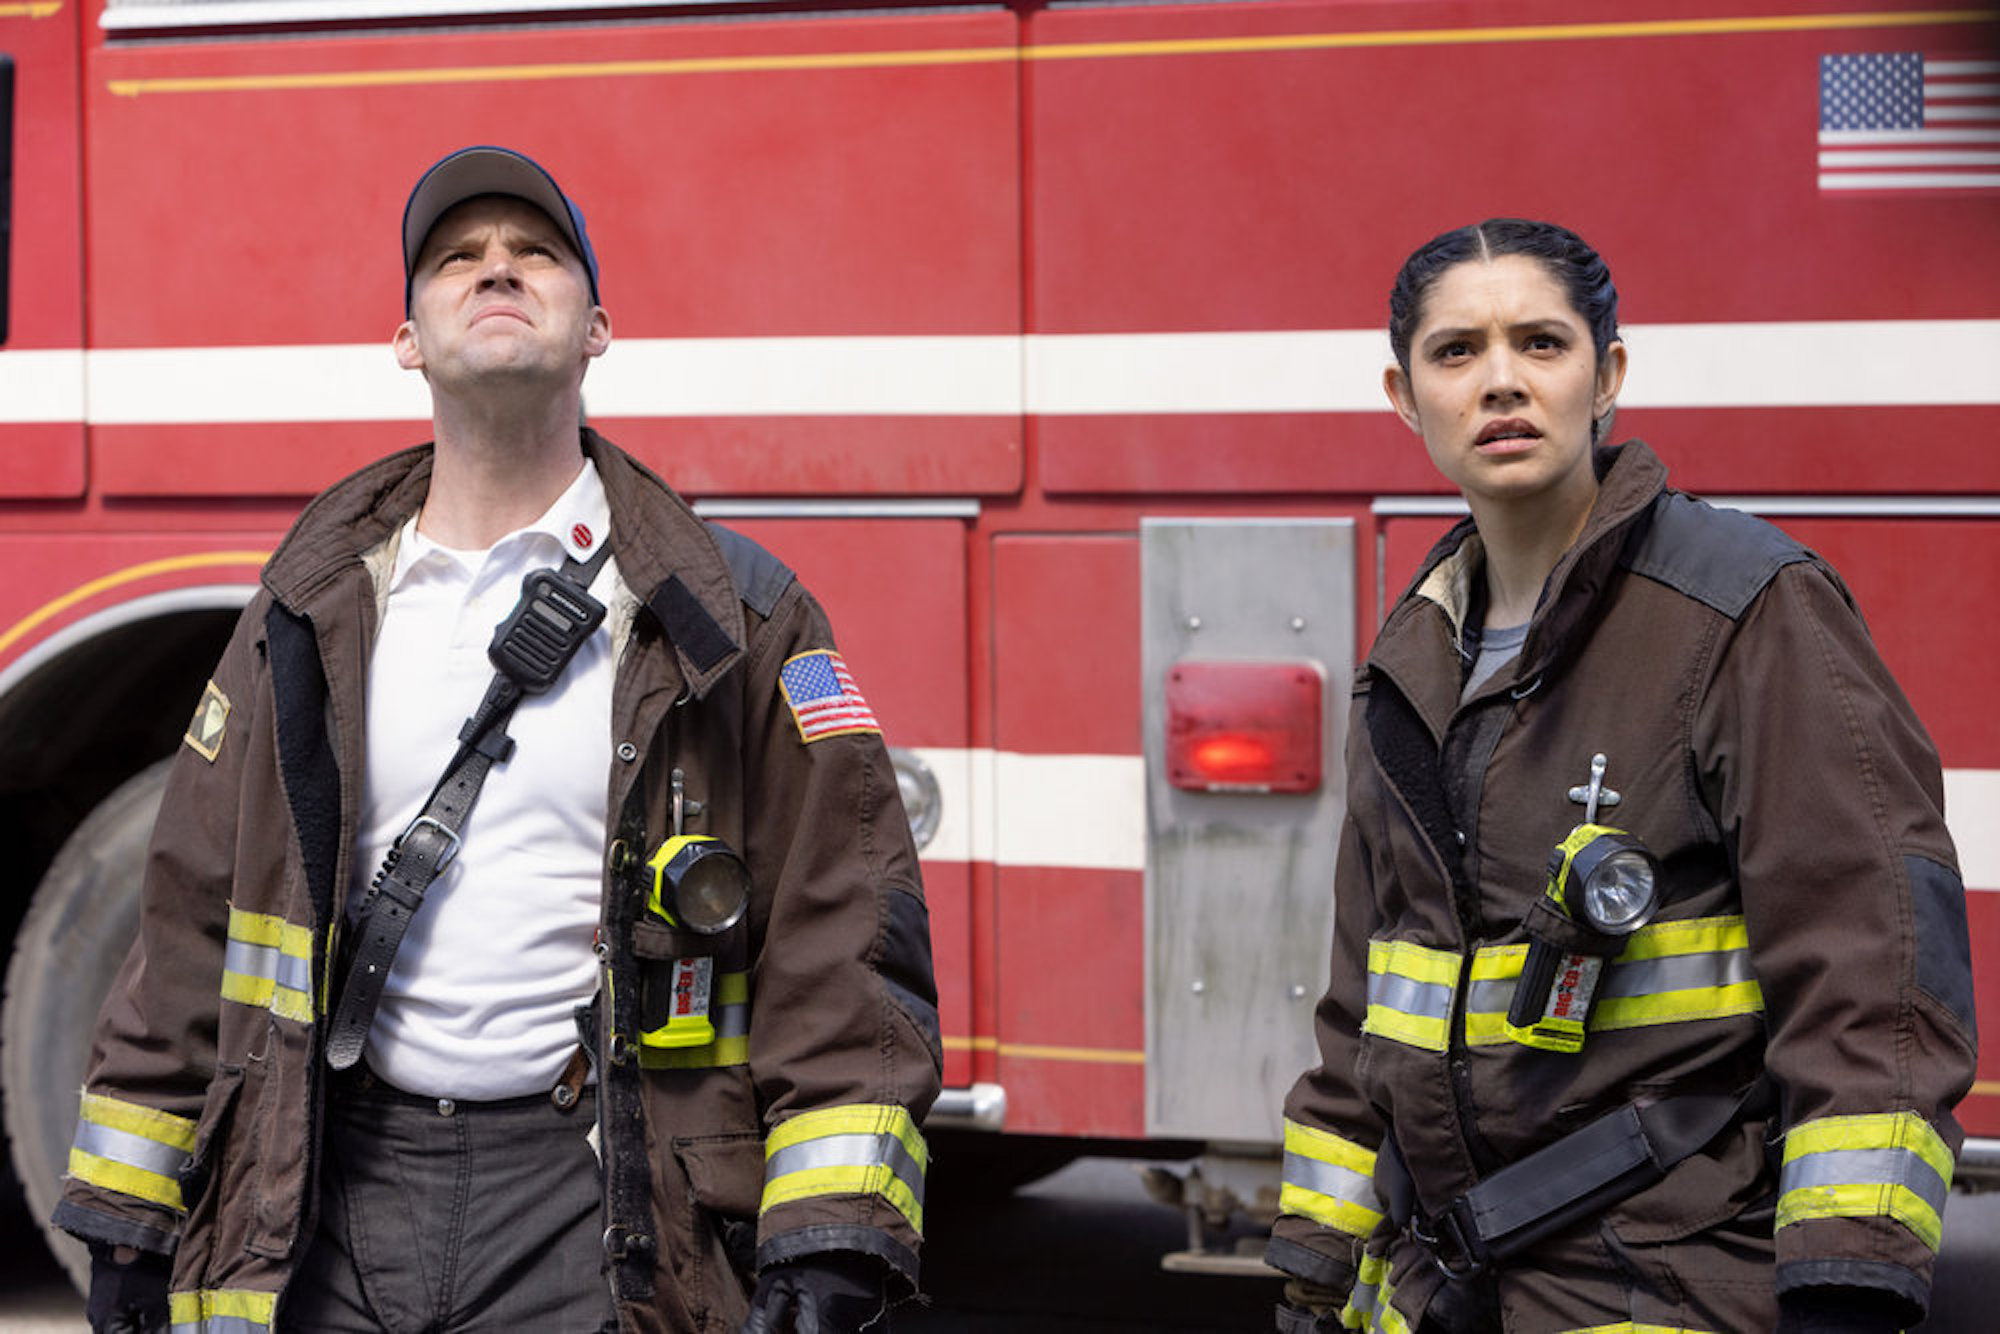 Jesse Spencer as Matthew Casey and Miranda Rae Mayo as Stella Kidd from 'Chicago Fire' Season 10 dressed in firefighting uniform and looking intensely ahead